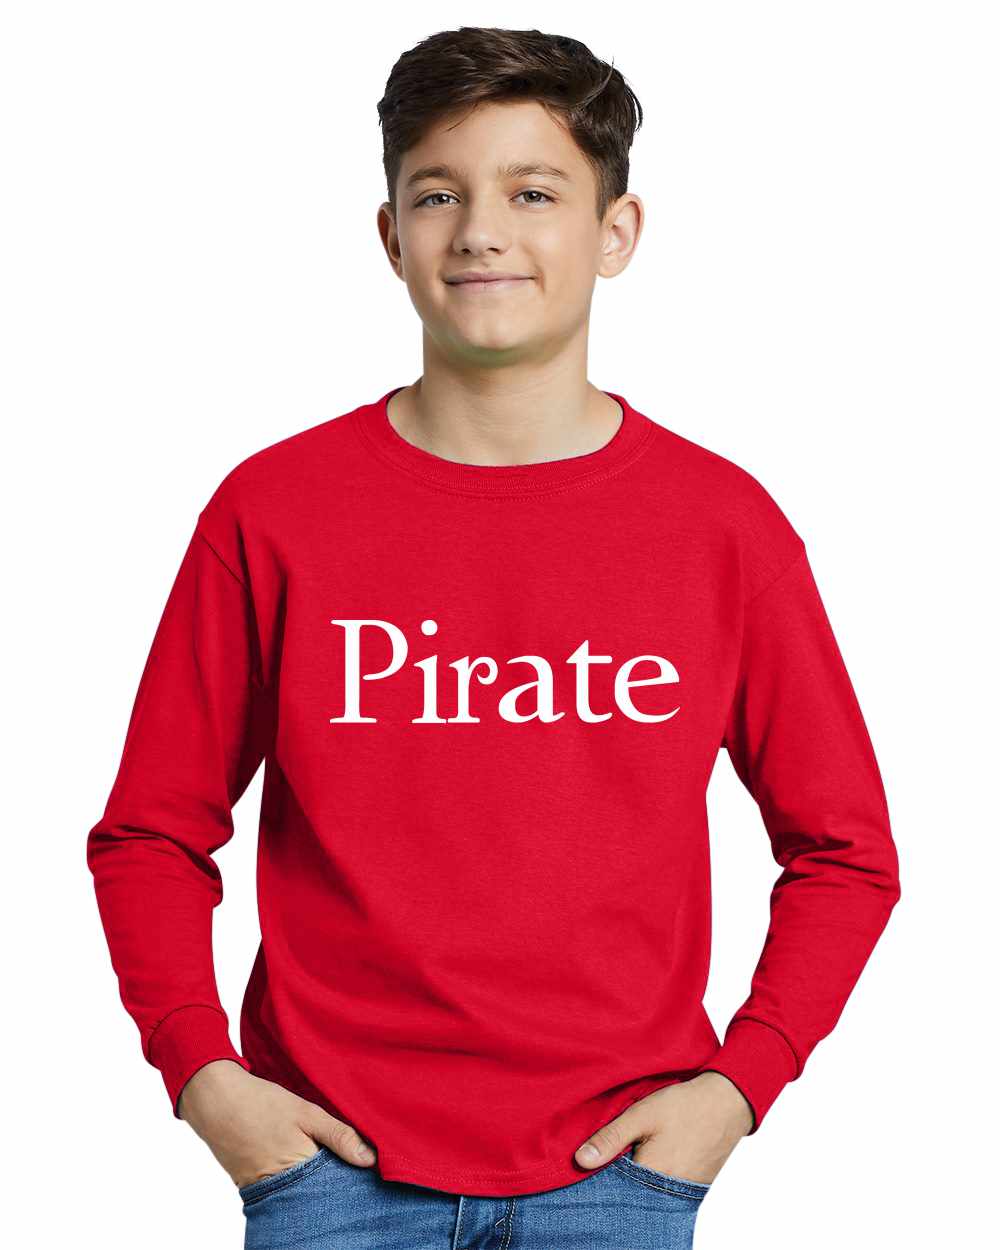 Pirate on Youth Long Sleeve Shirt